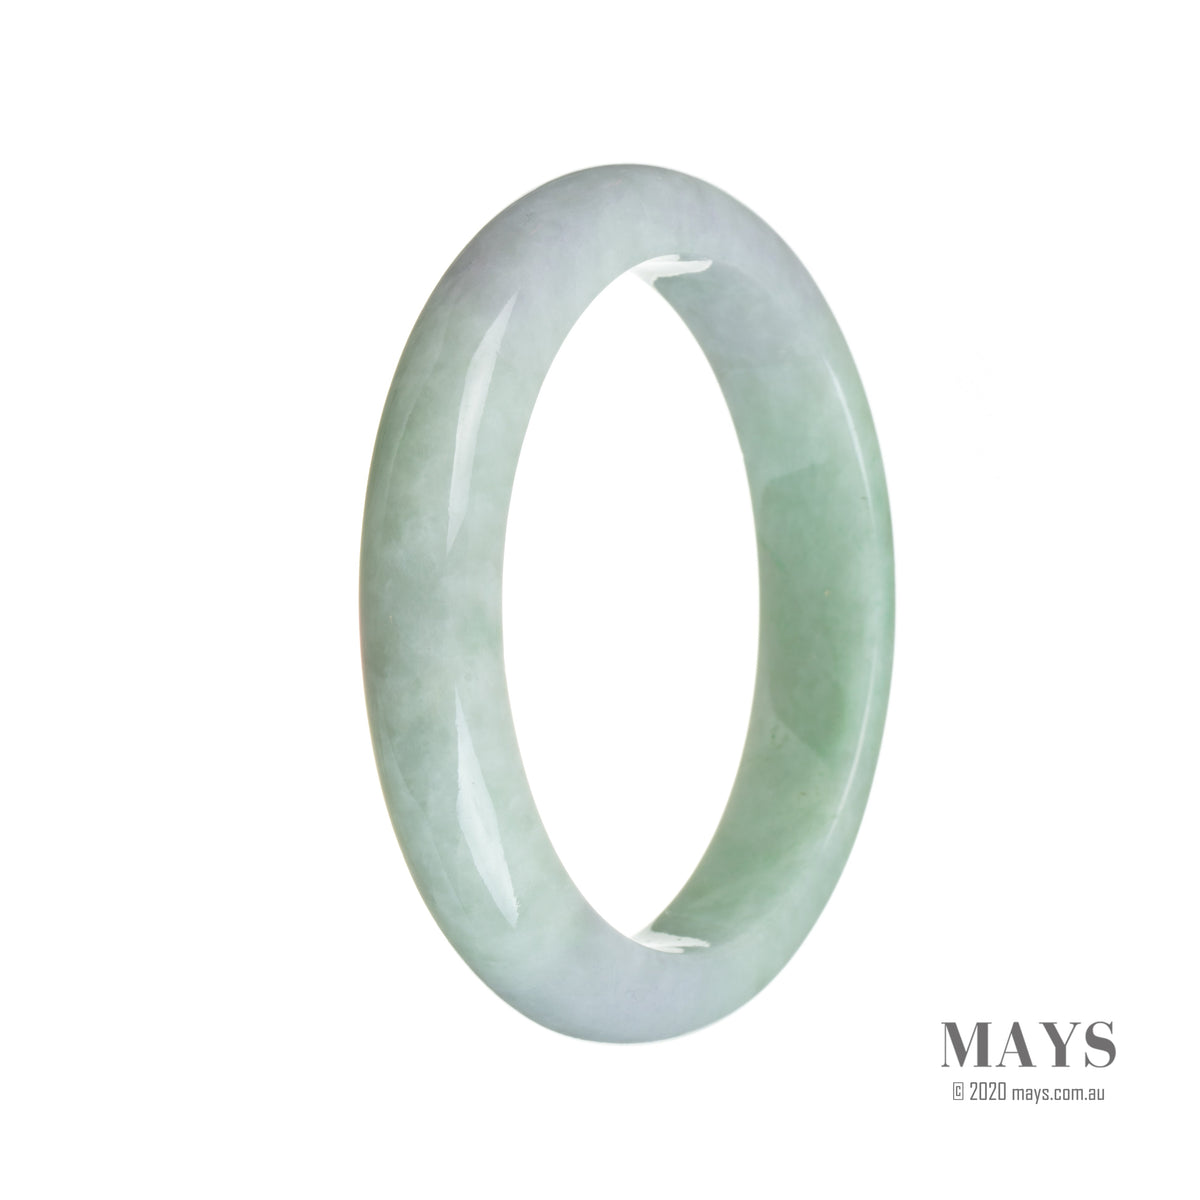 A close-up photo of a traditional jade bangle in a semi-round shape, measuring 57mm in diameter. The bangle features a vibrant green color with natural variations and markings. It is accompanied by a bundle of real untreated lavender, adding a touch of natural beauty to the image.